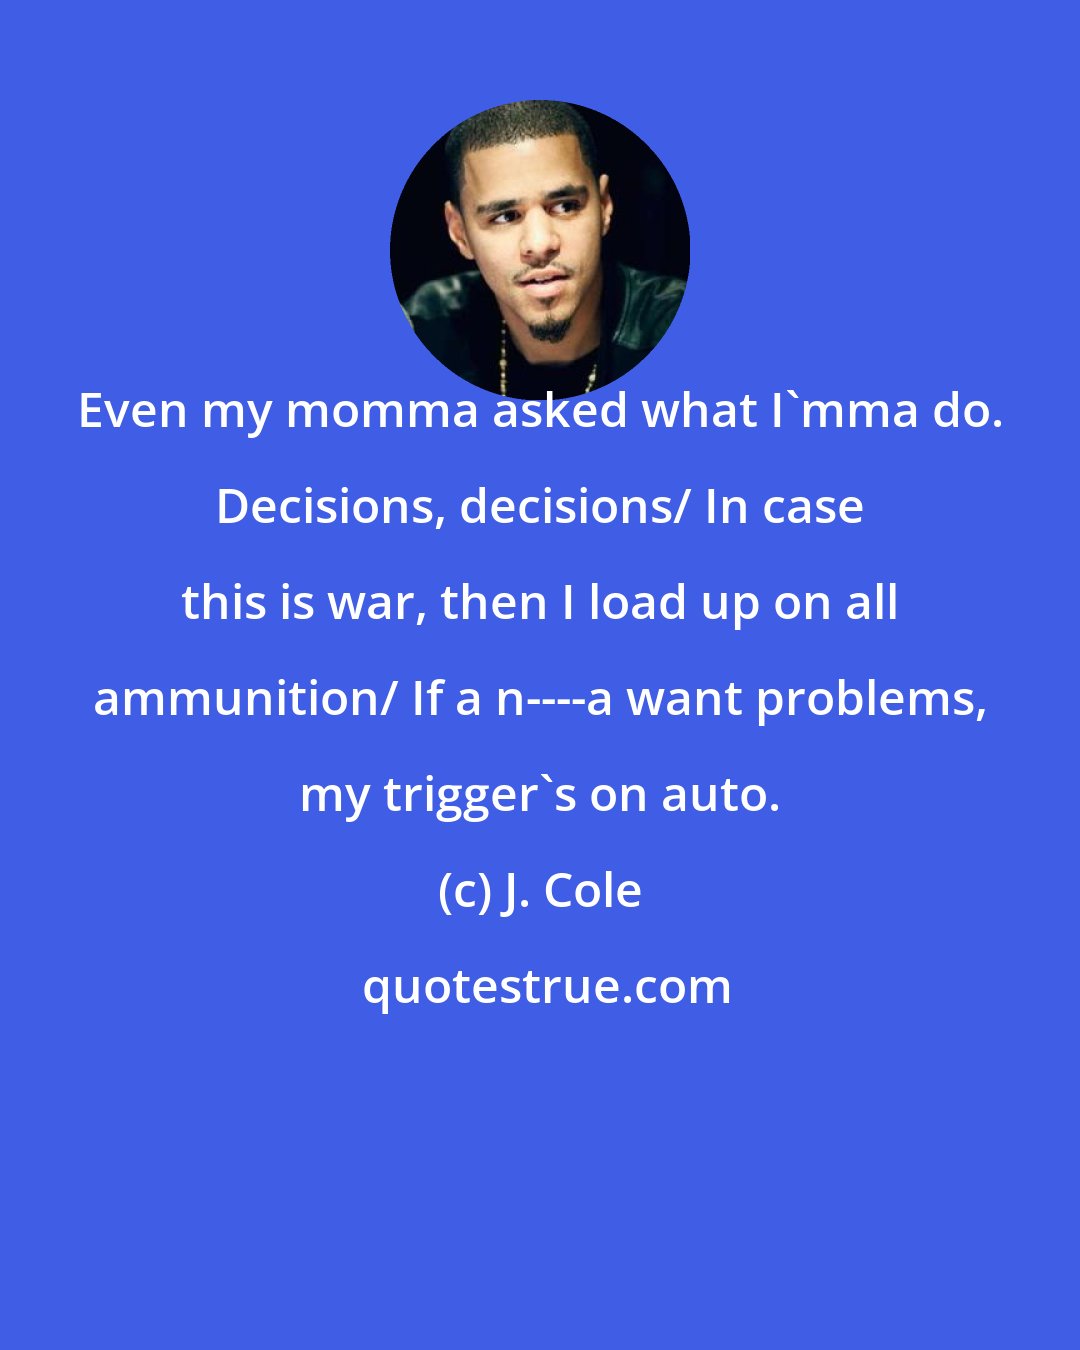 J. Cole: Even my momma asked what I'mma do. Decisions, decisions/ In case this is war, then I load up on all ammunition/ If a n----a want problems, my trigger's on auto.